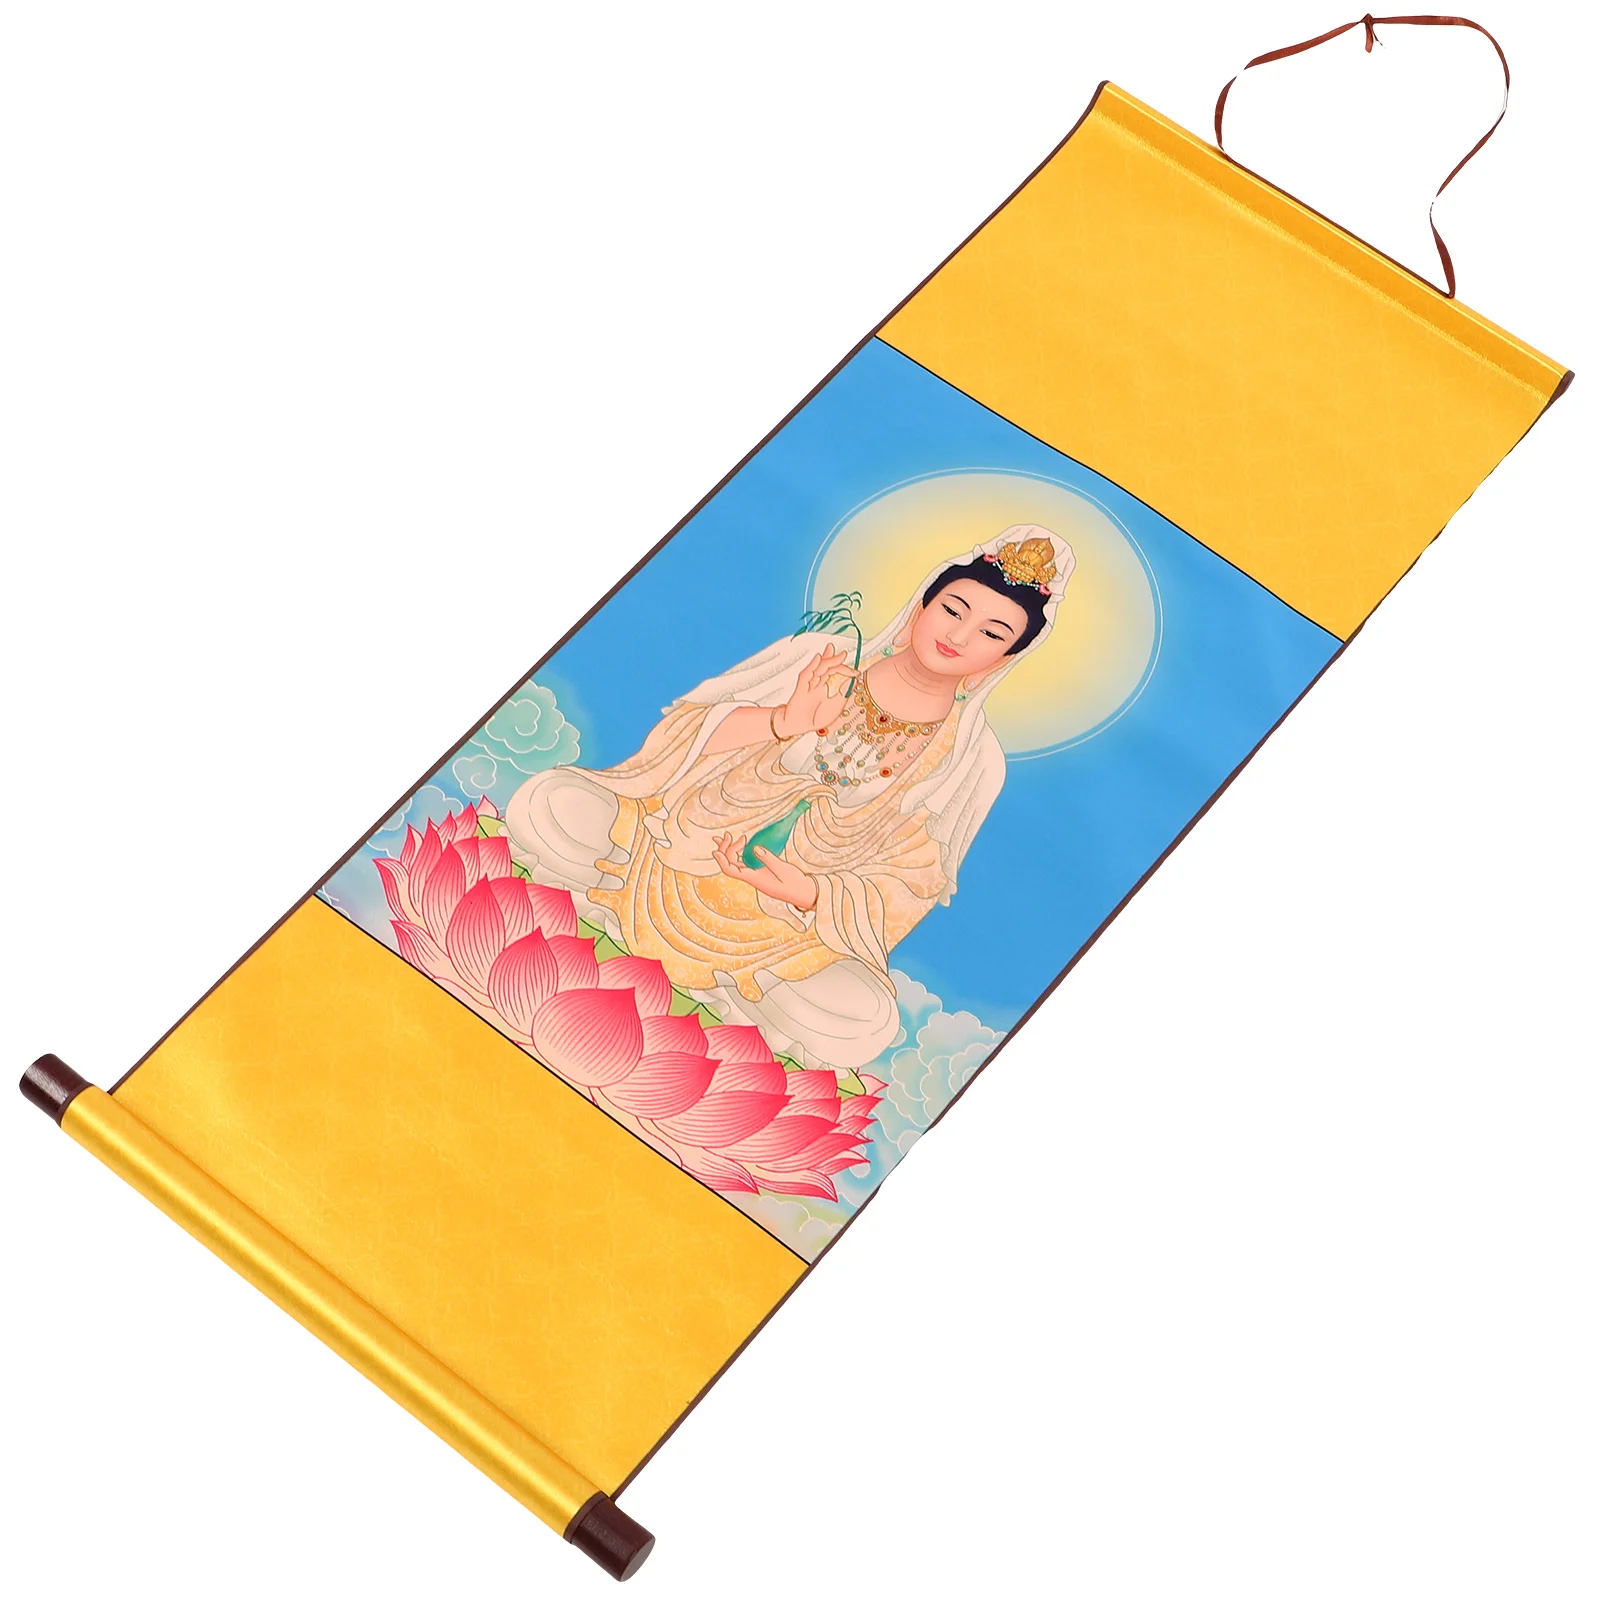 

Wall Art Wall Hanging Scroll Decor Religious Ornament Background Decor Buddha Statues Hanging Paintings Home Offerings And Decor